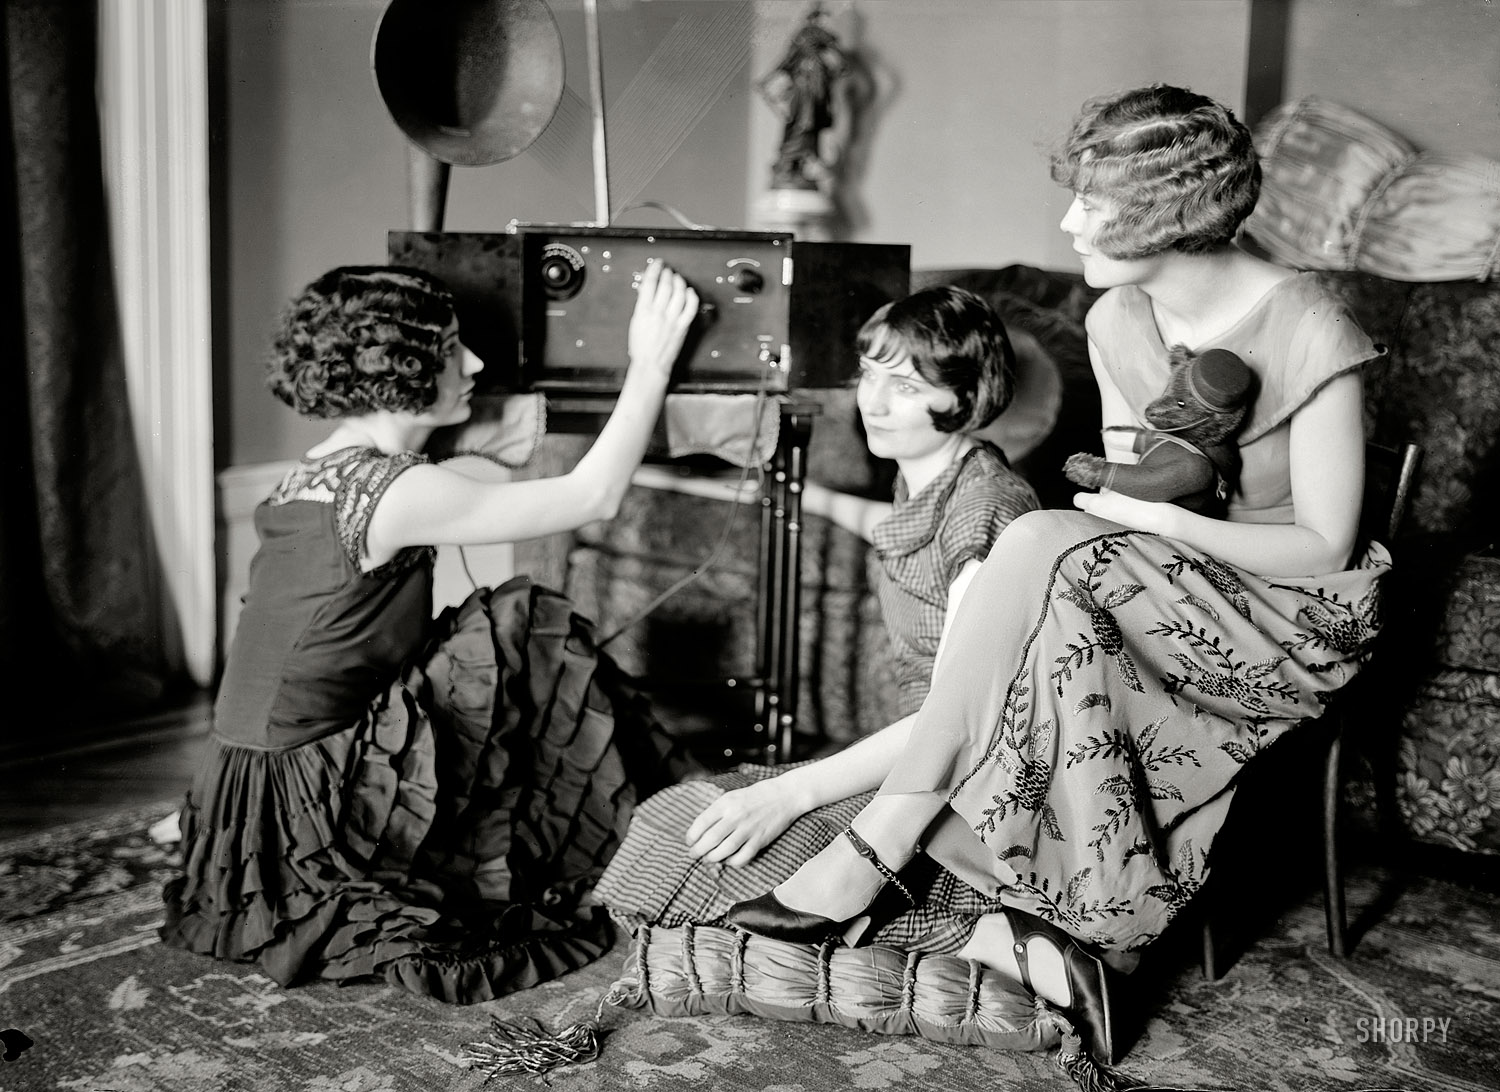 New York circa 1924. "Brox sisters." Our fourth look at these saucy siblings. 5x7 glass negative, George Grantham Bain Collection. View full size.